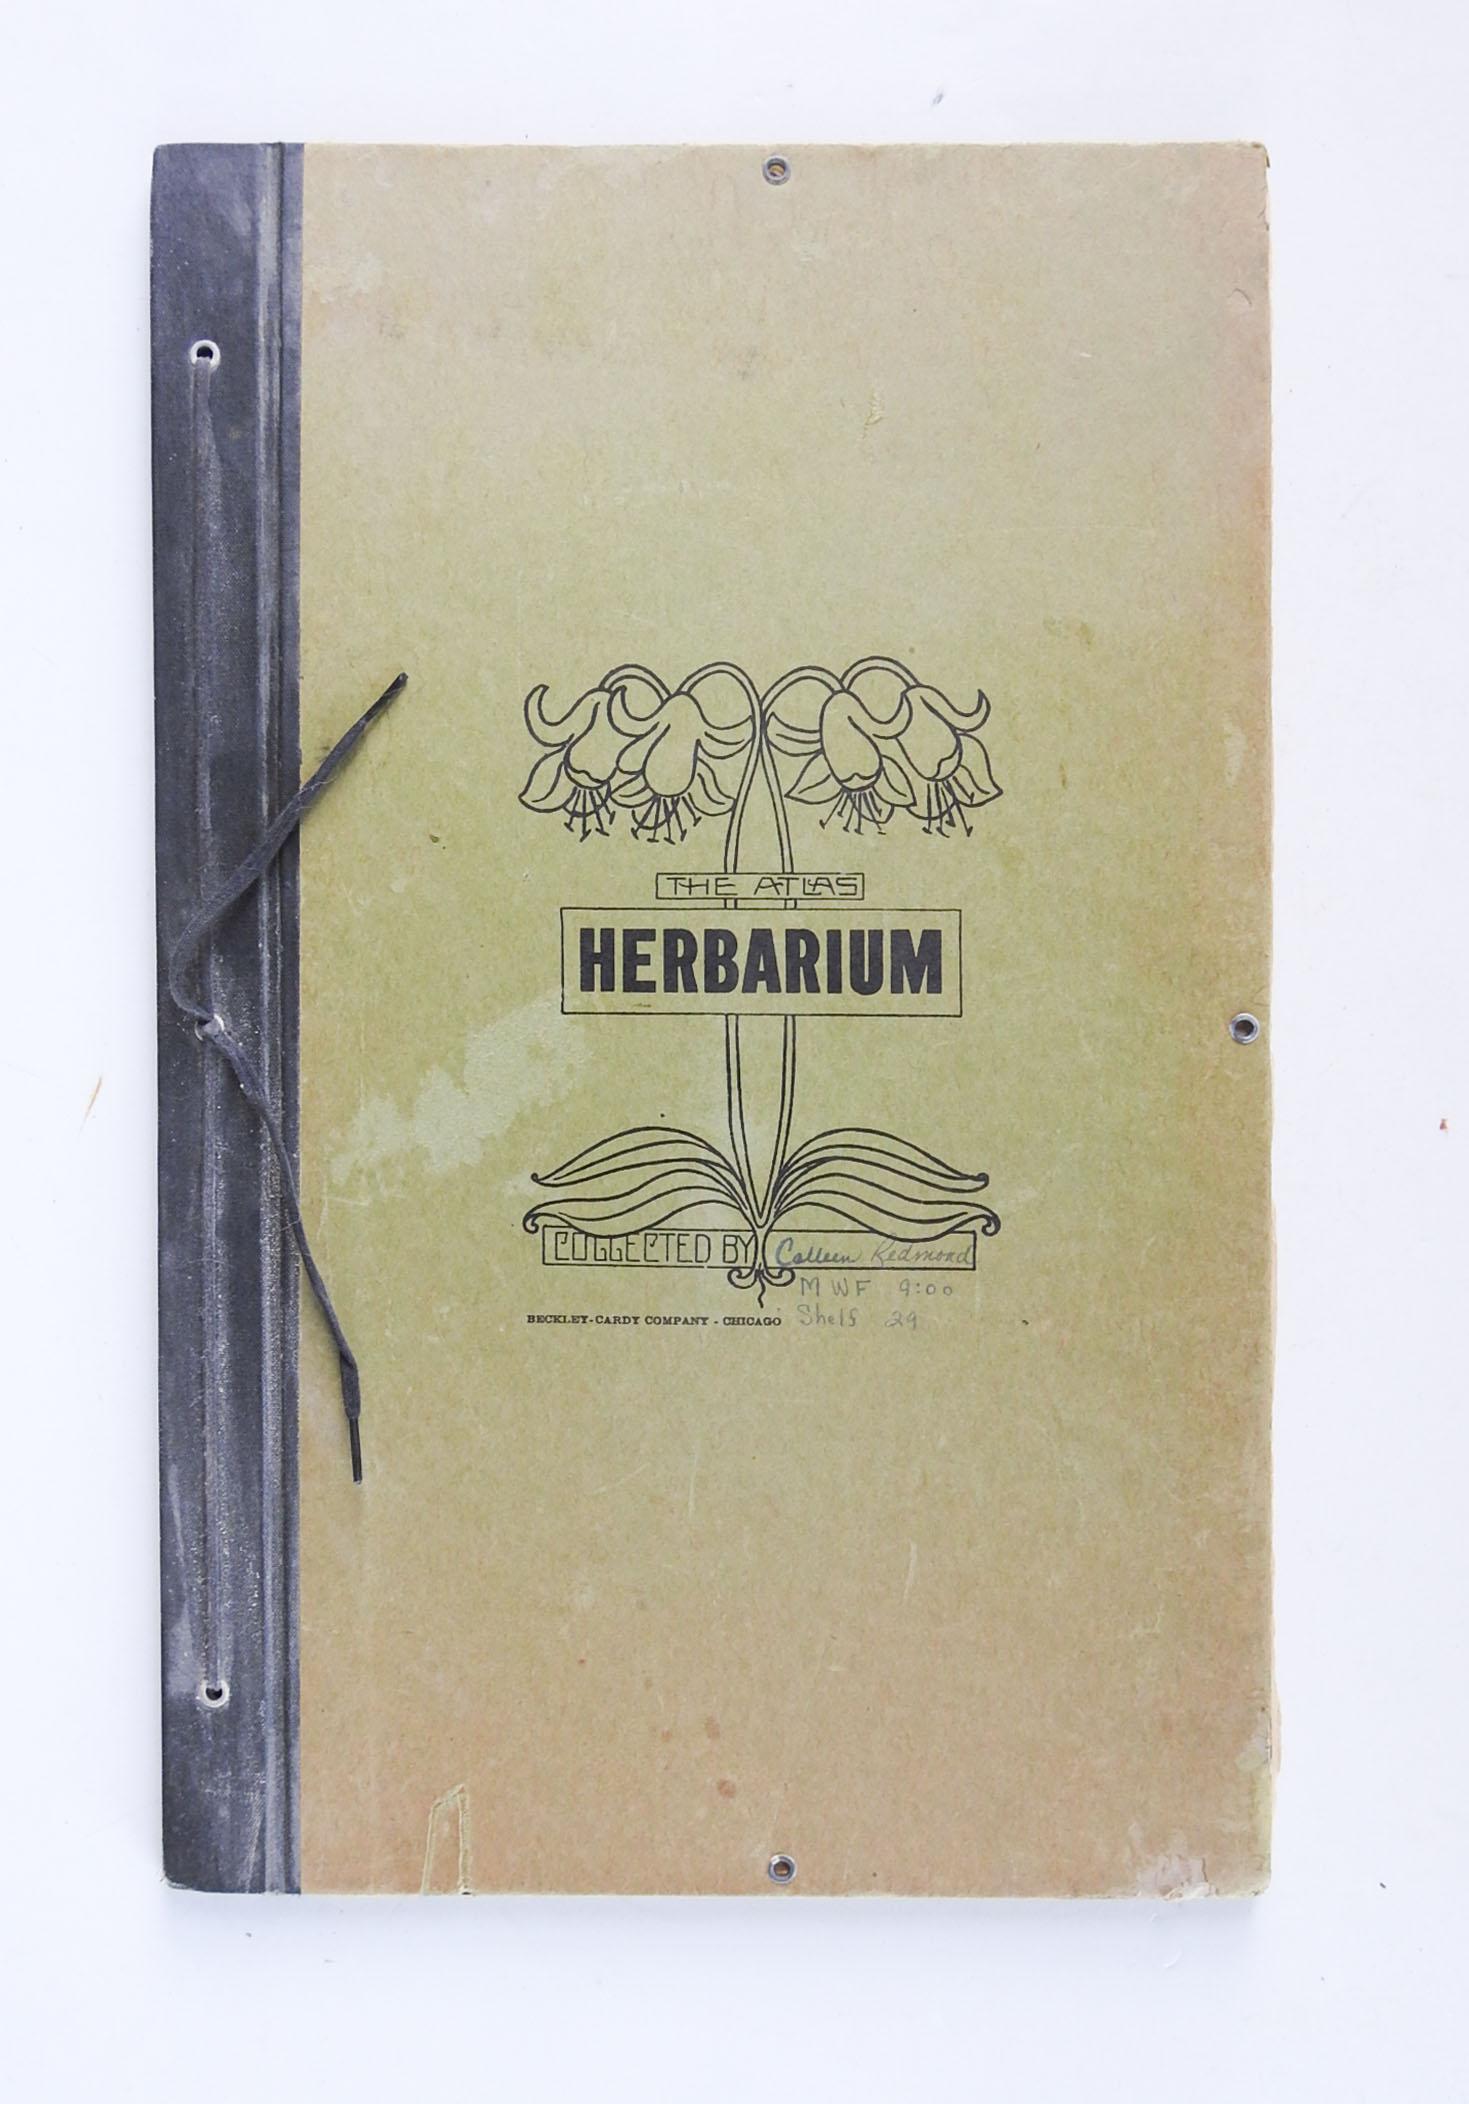 Circa 1930's bound herbarium with 34 plant specimens. Collected by Colleen Redmond, Mars Hill College, North Carolina, looks to be a class project. Hand written description on each page, specimens attached with cellophane tape. Easily unbound for